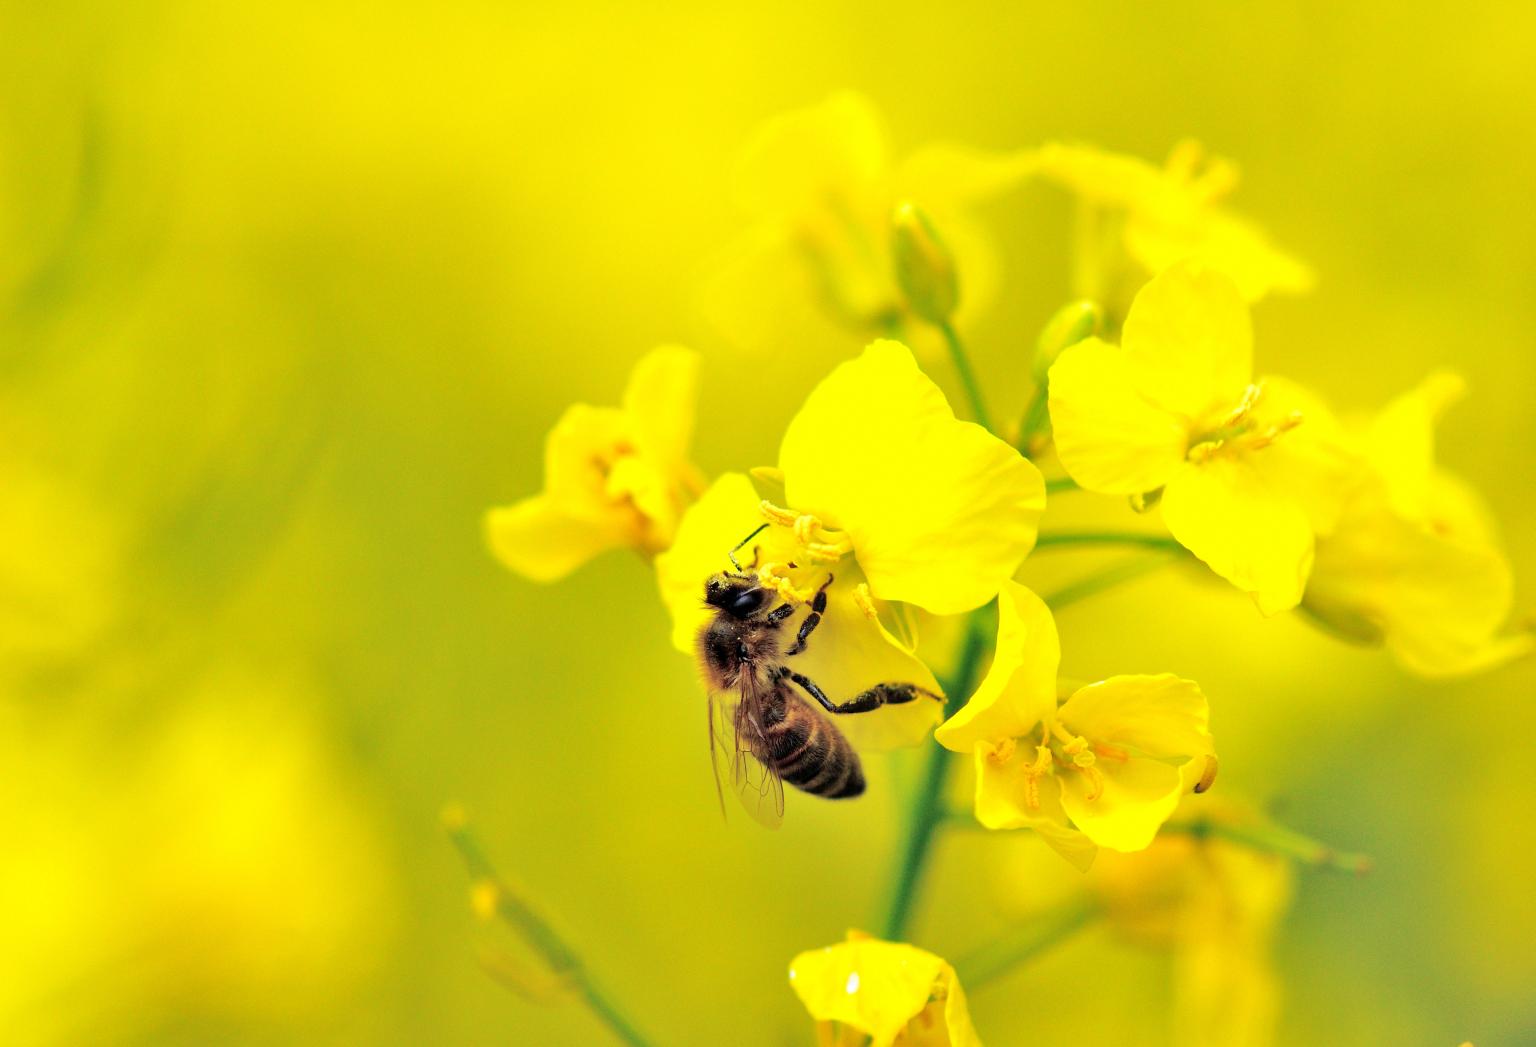 A honeybee on Oilseed Rape           Picture by Lucy Hulmes